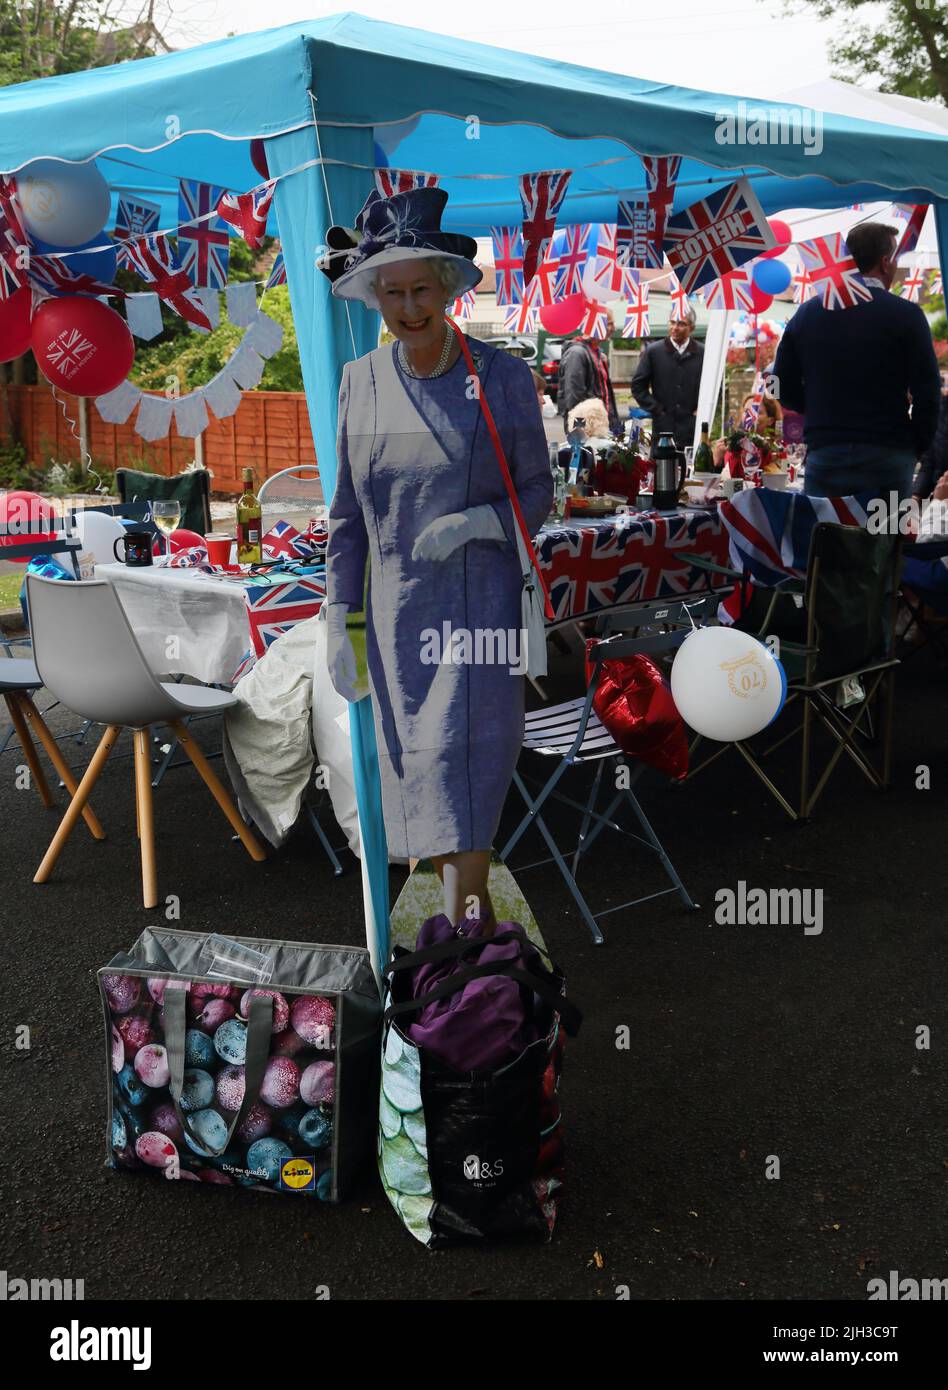 Cardboard cut-out of Queen Elizabeth II by Table Decorated with bunting At Street Party Celebrating Queen Elizabeth II Platinum Jubilee Surrey England Stock Photo